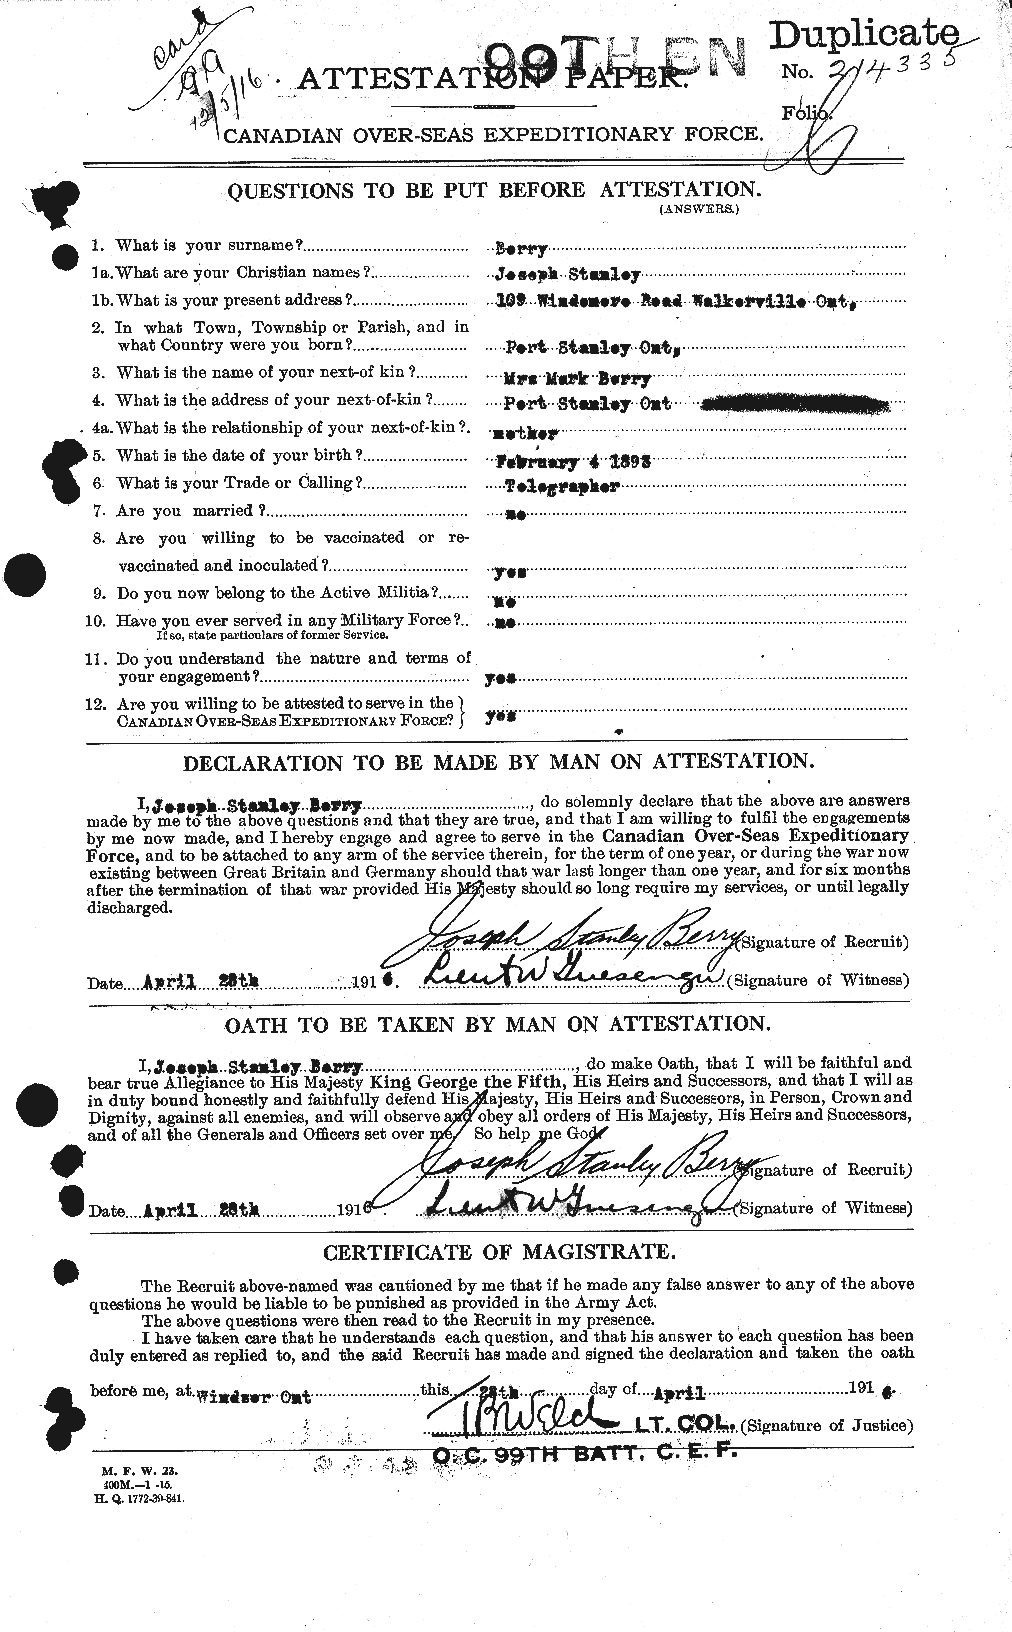 Personnel Records of the First World War - CEF 240994a